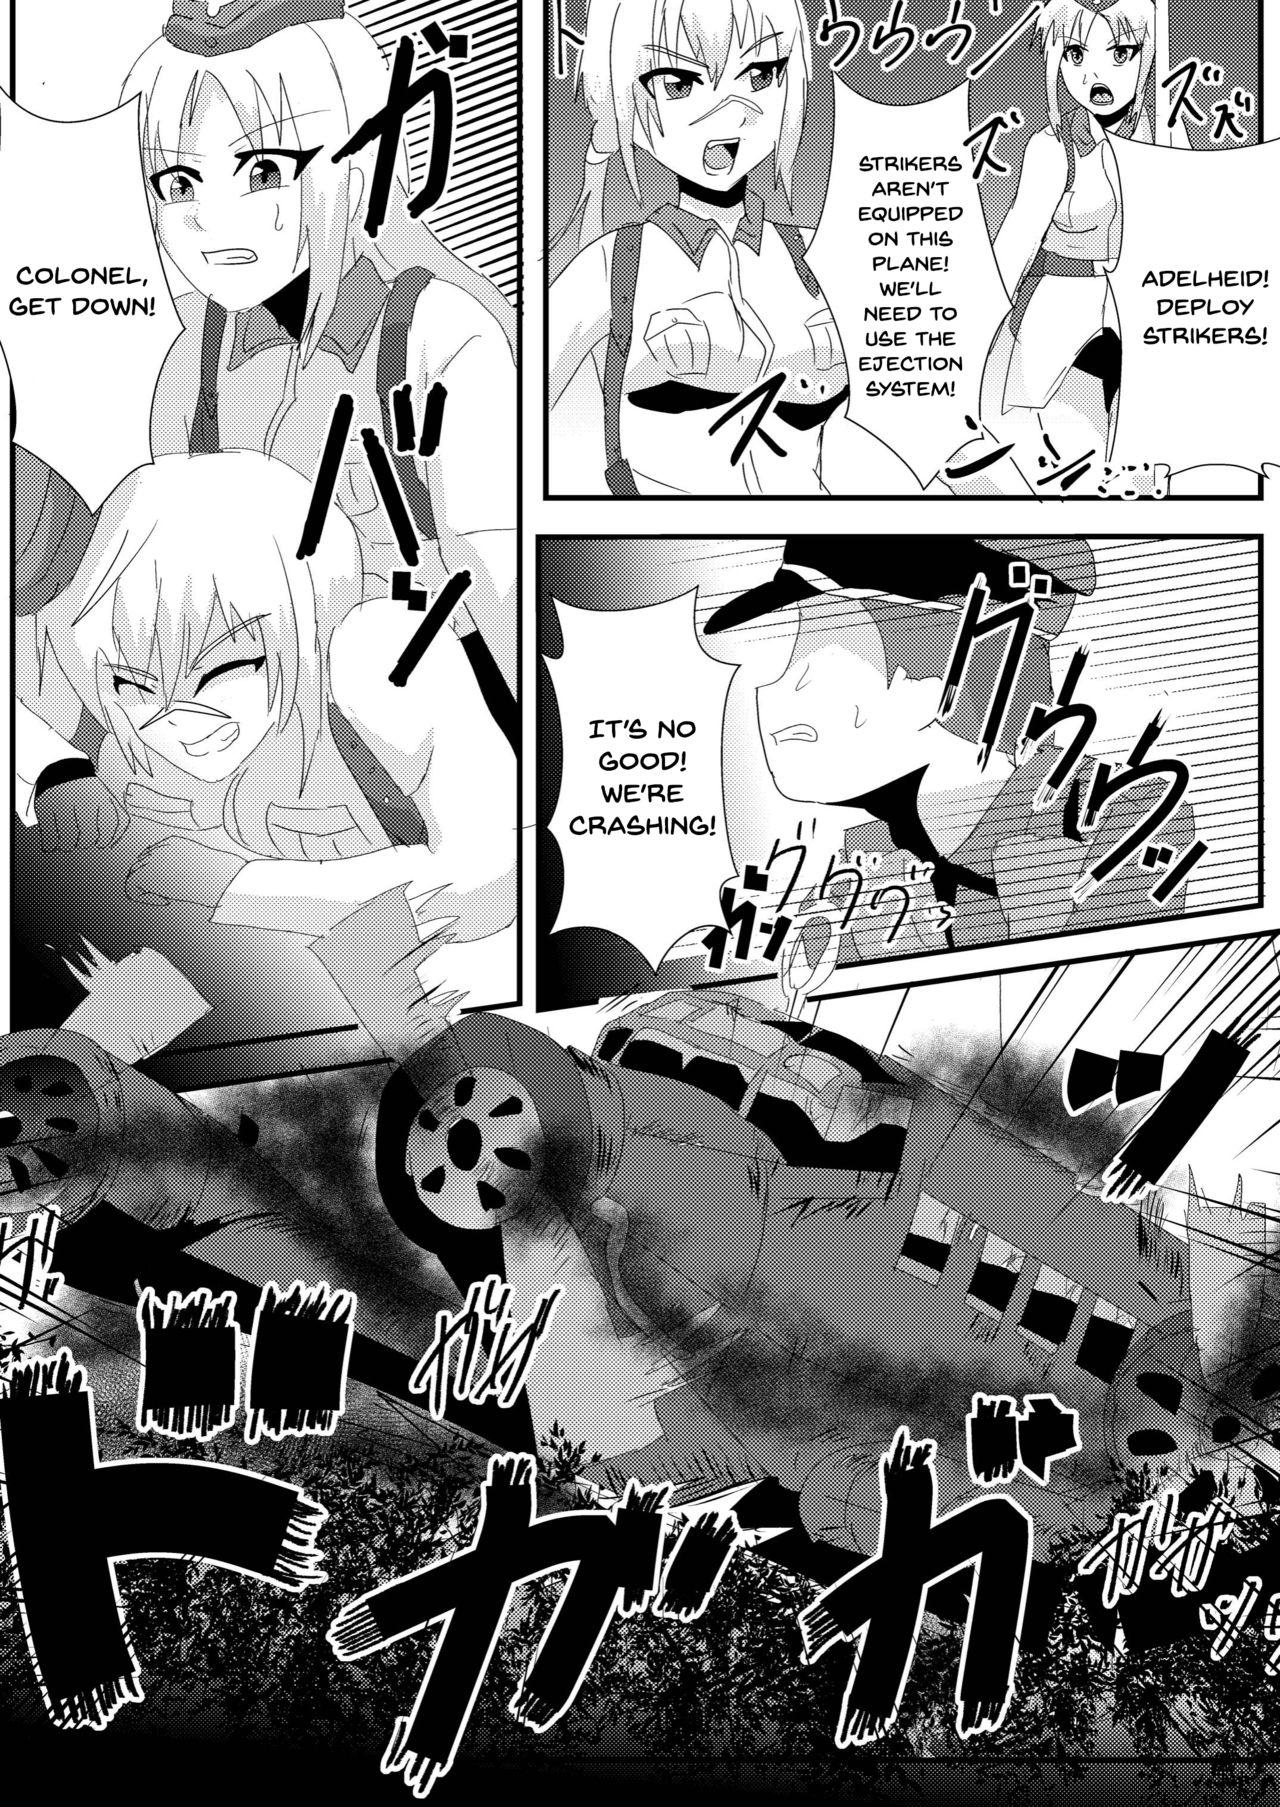 Atm Parasite Witches 2 - Strike witches Pattaya - Page 5